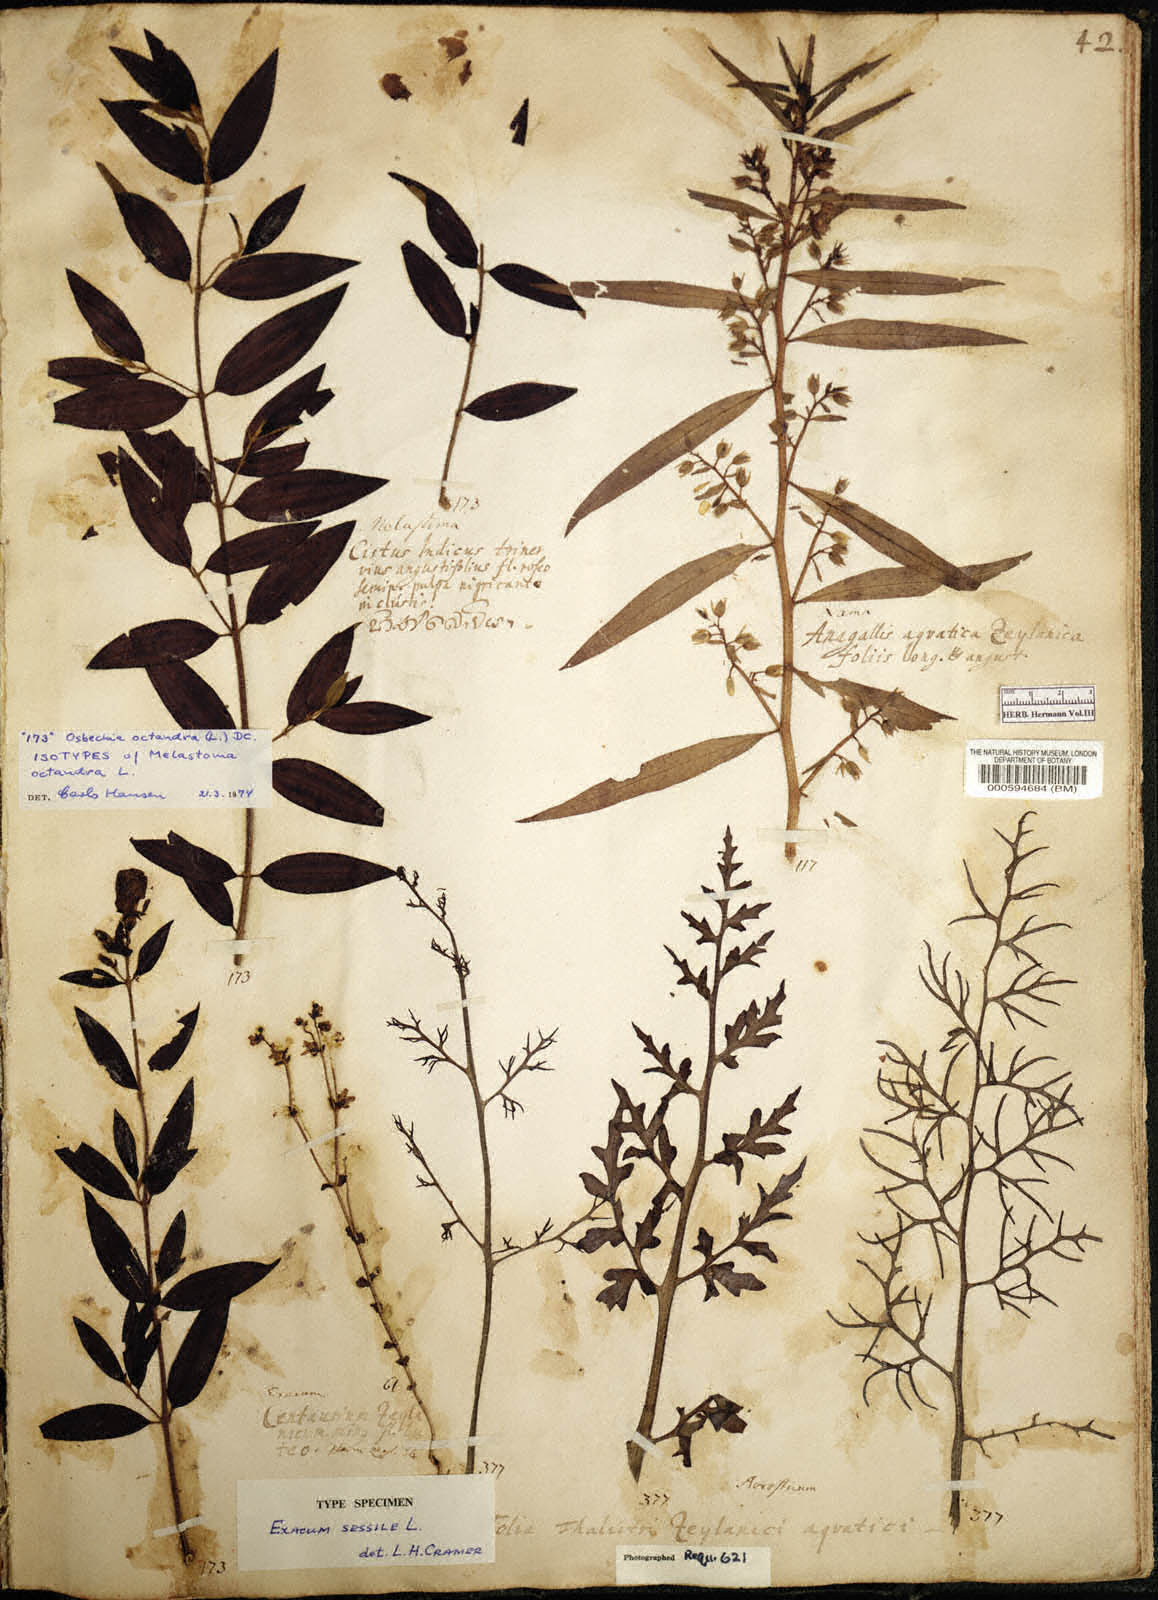 https://www.nhm.ac.uk//resources/research-curation/projects/hermann-herbarium/lgimages/BM000594684.JPG